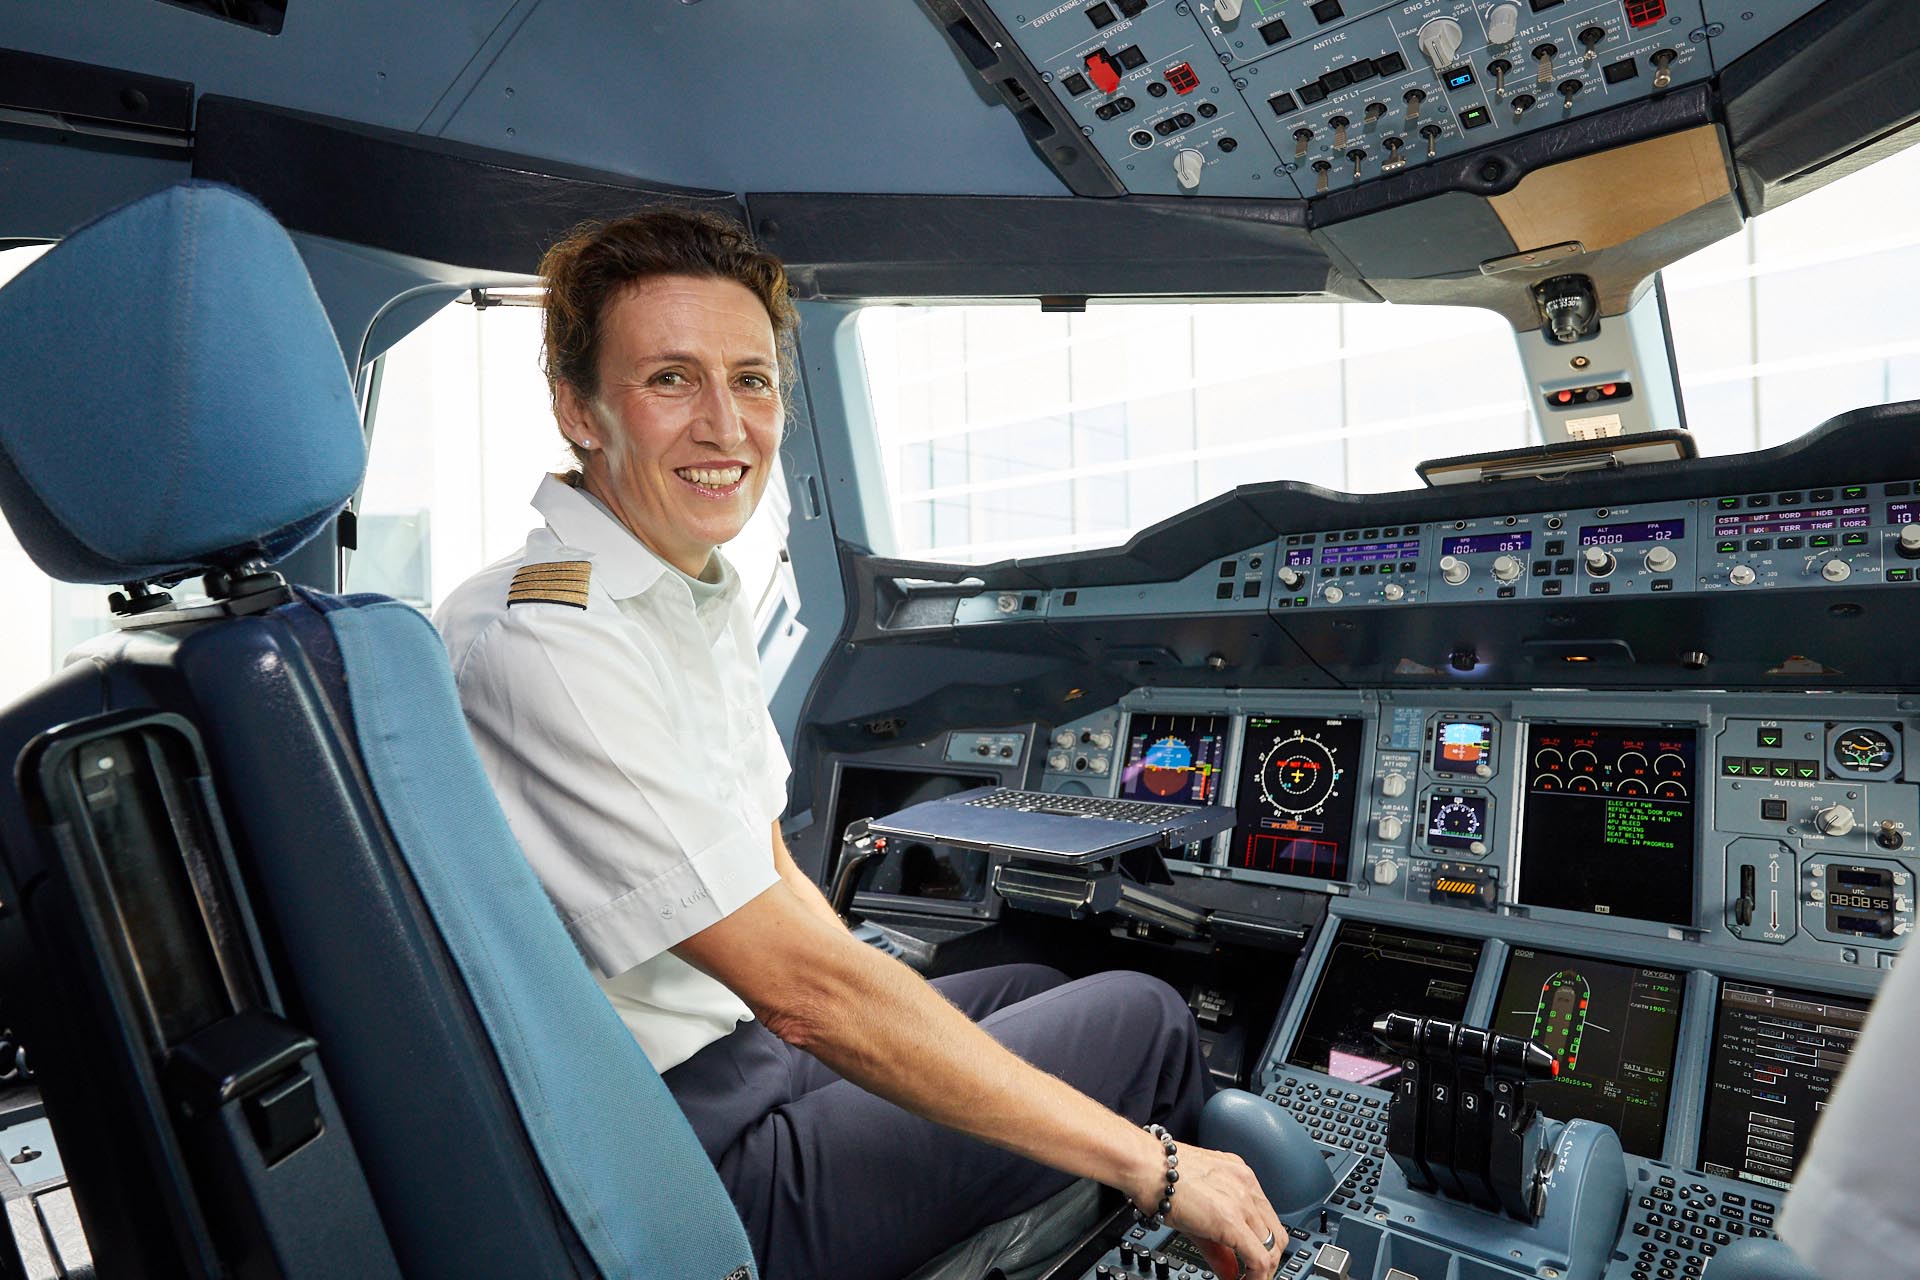 Female pilots taking off: women have been flying for Lufthansa for 30 years